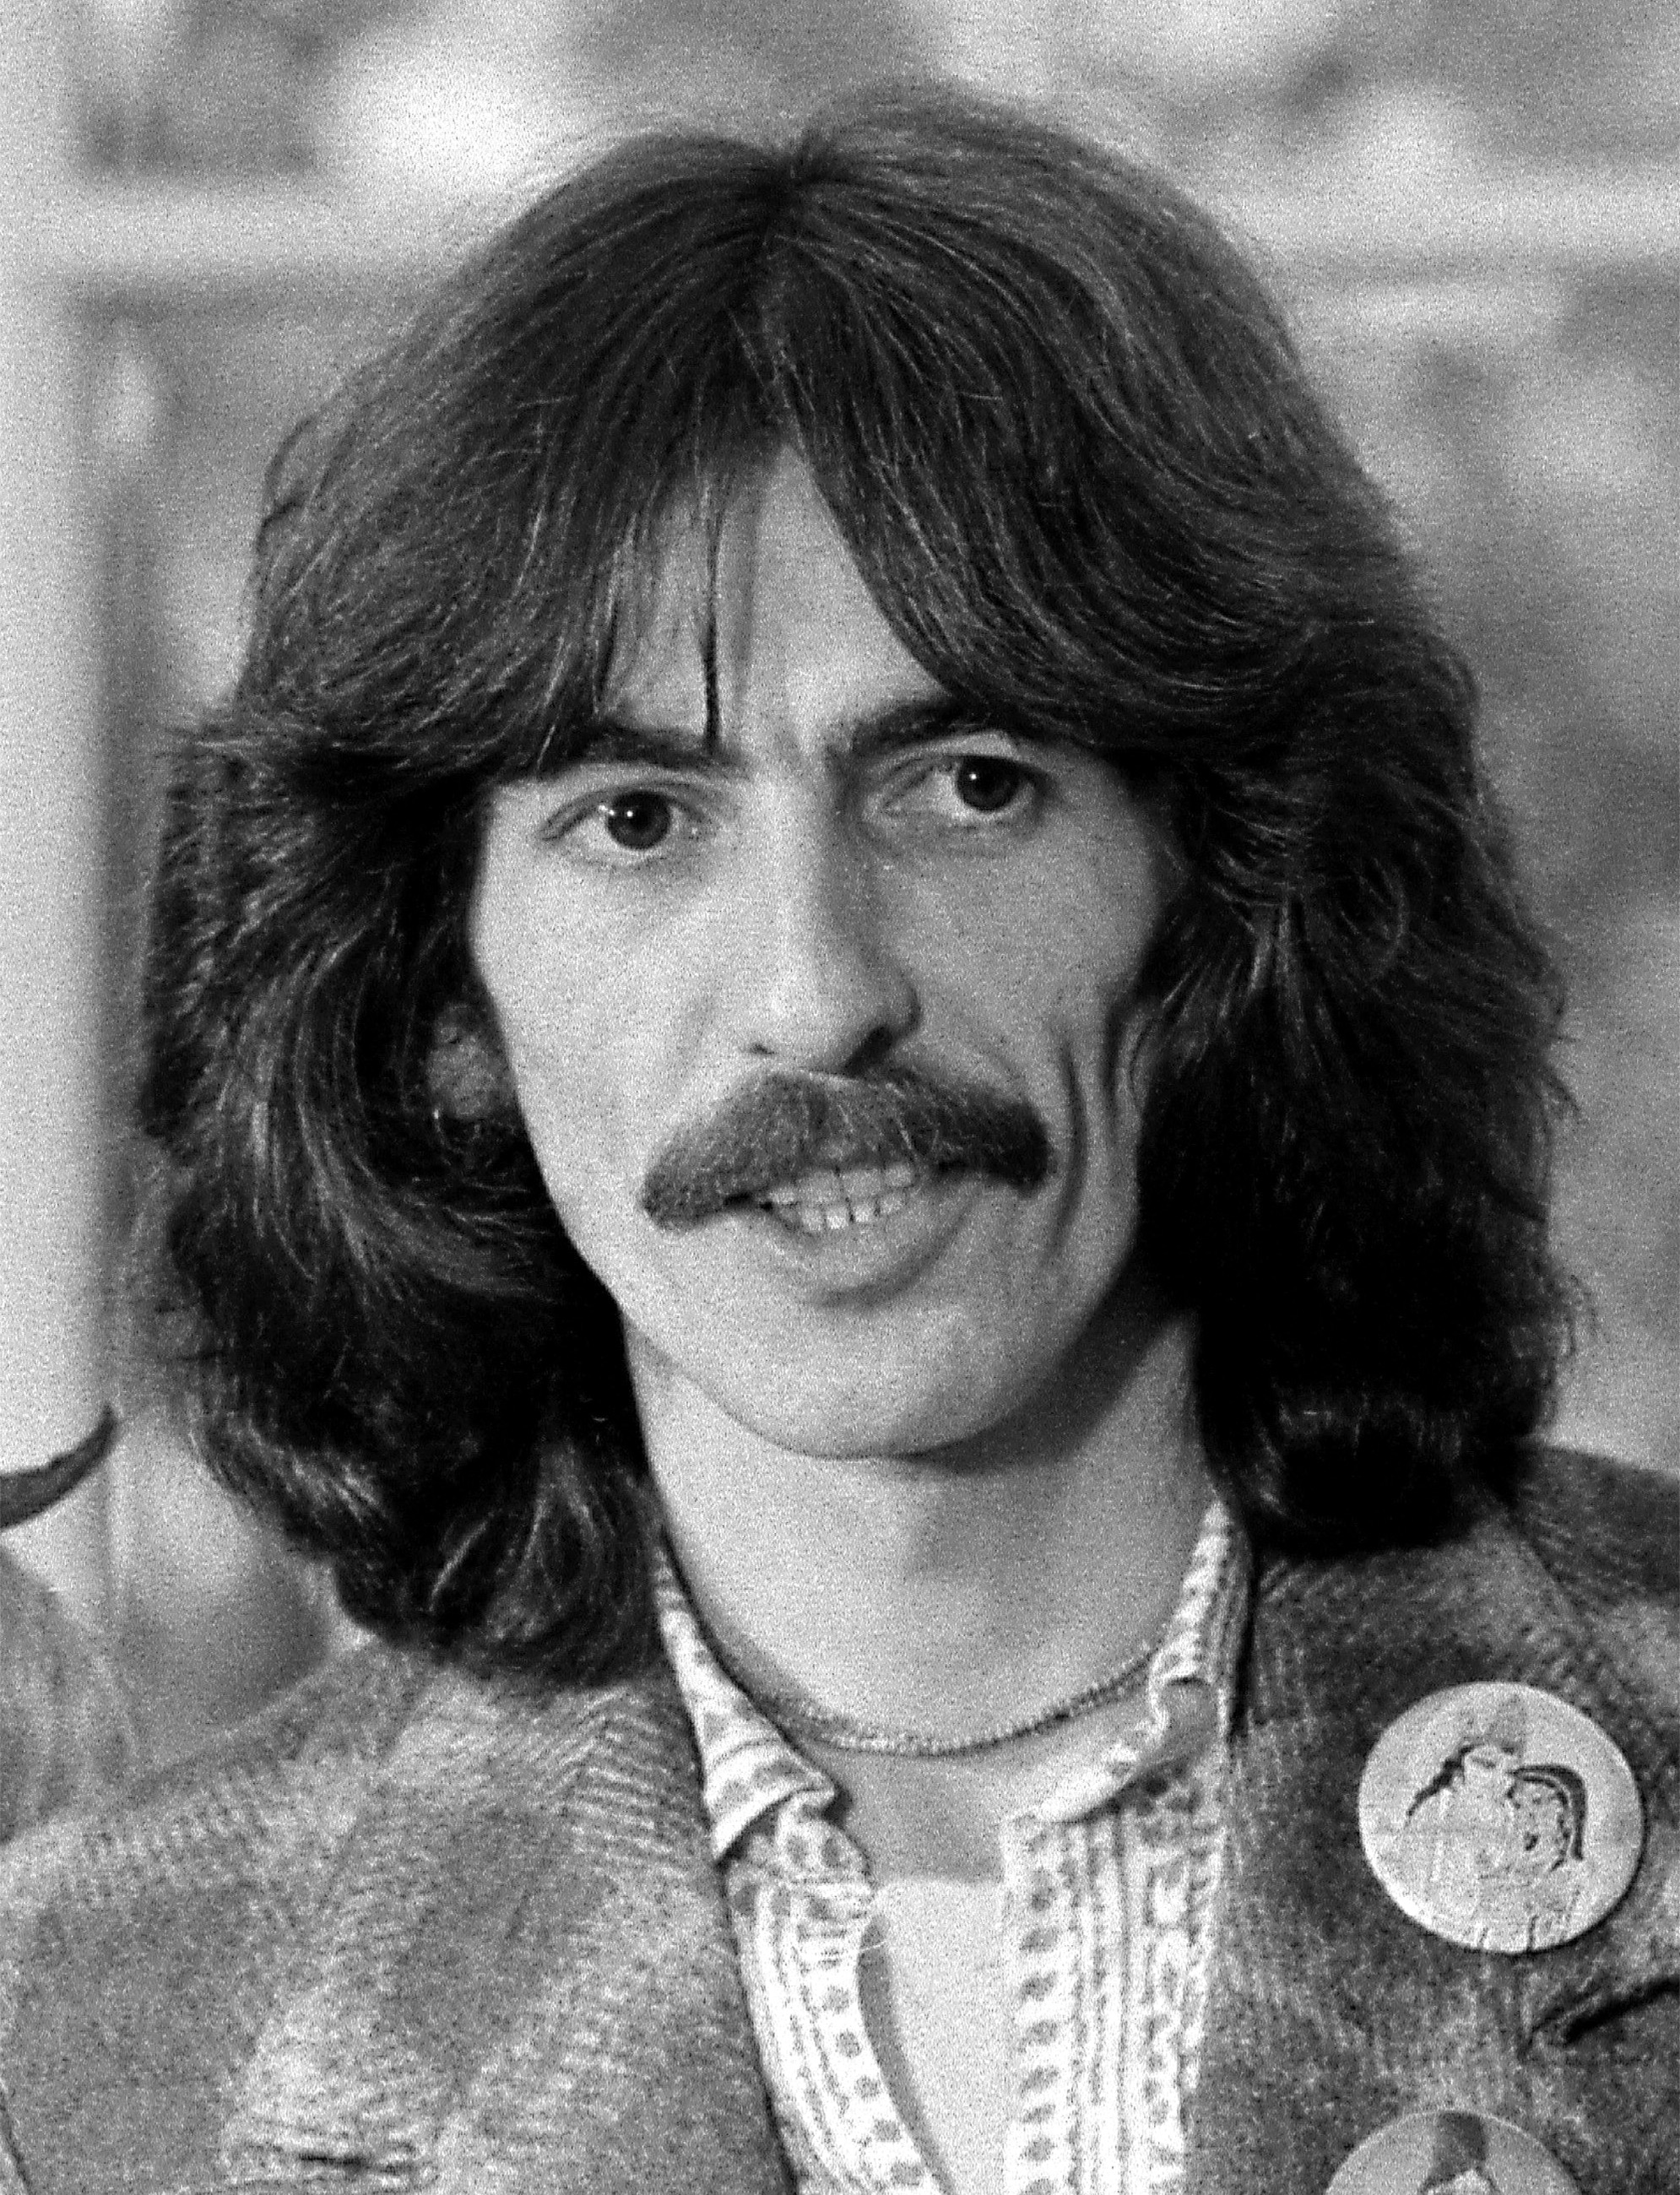 Harrison at the [[White House]] in 1974